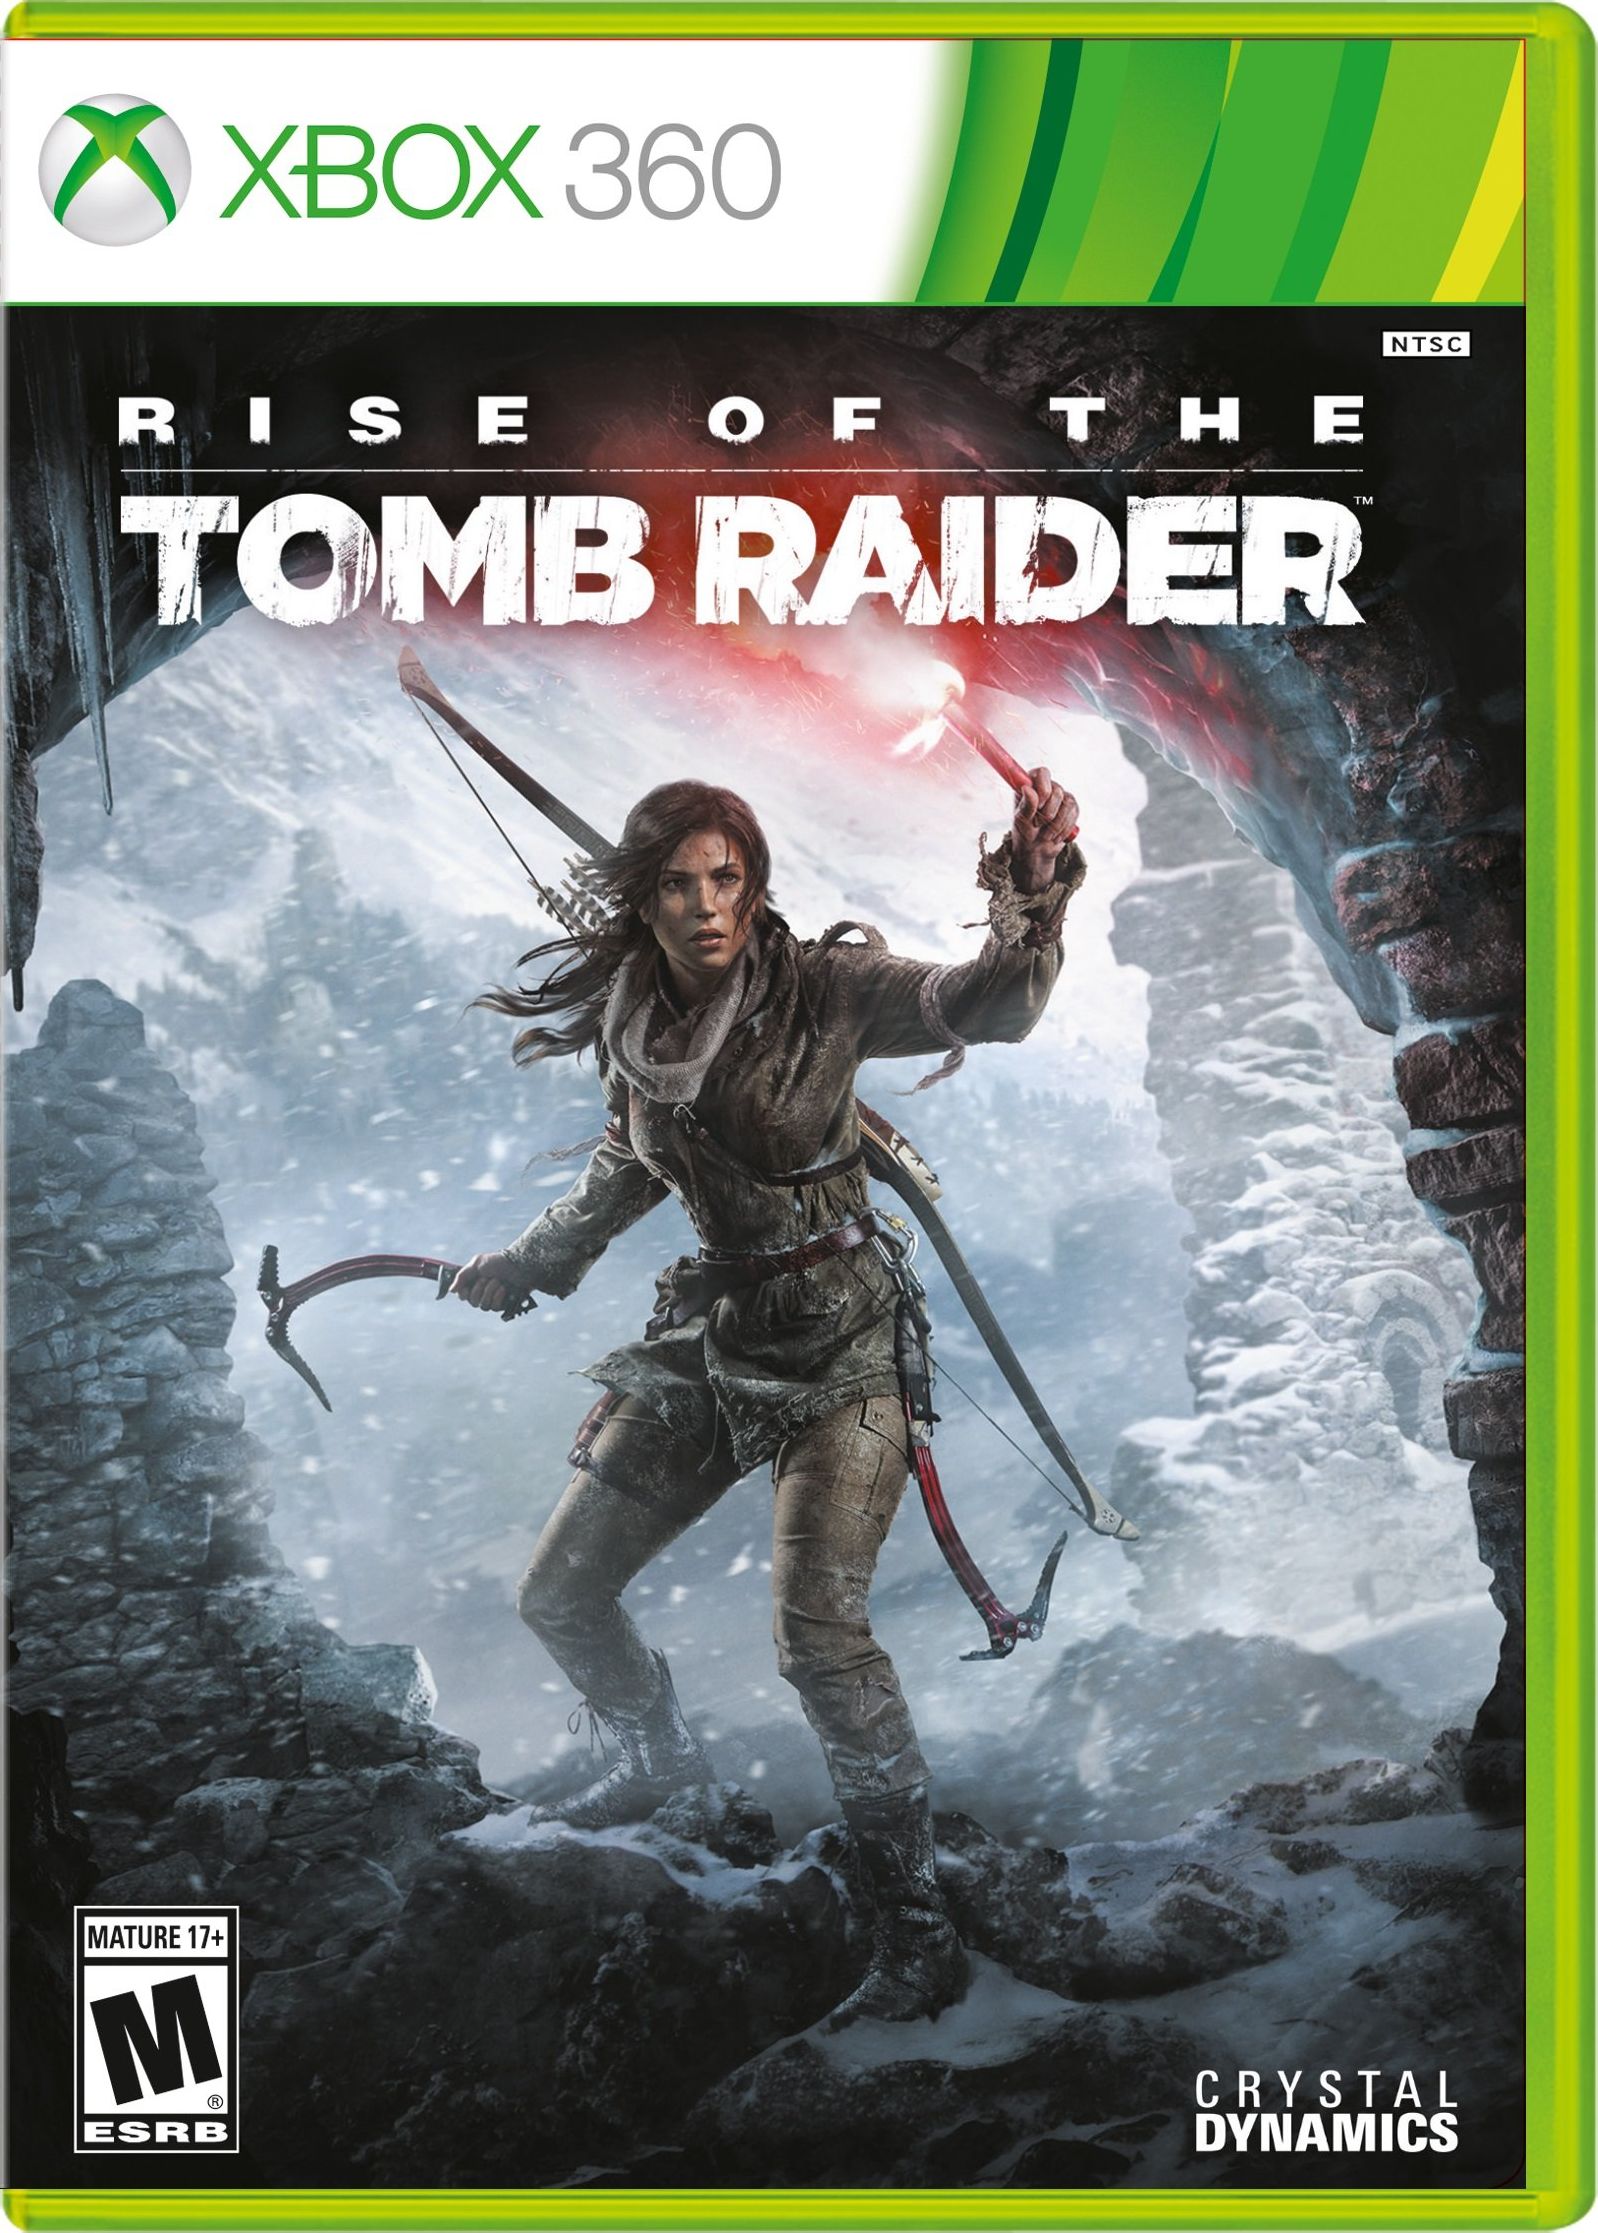 Rise of the Tomb Raider Release Date (PS4, PC, Xbox 360, Xbox One)